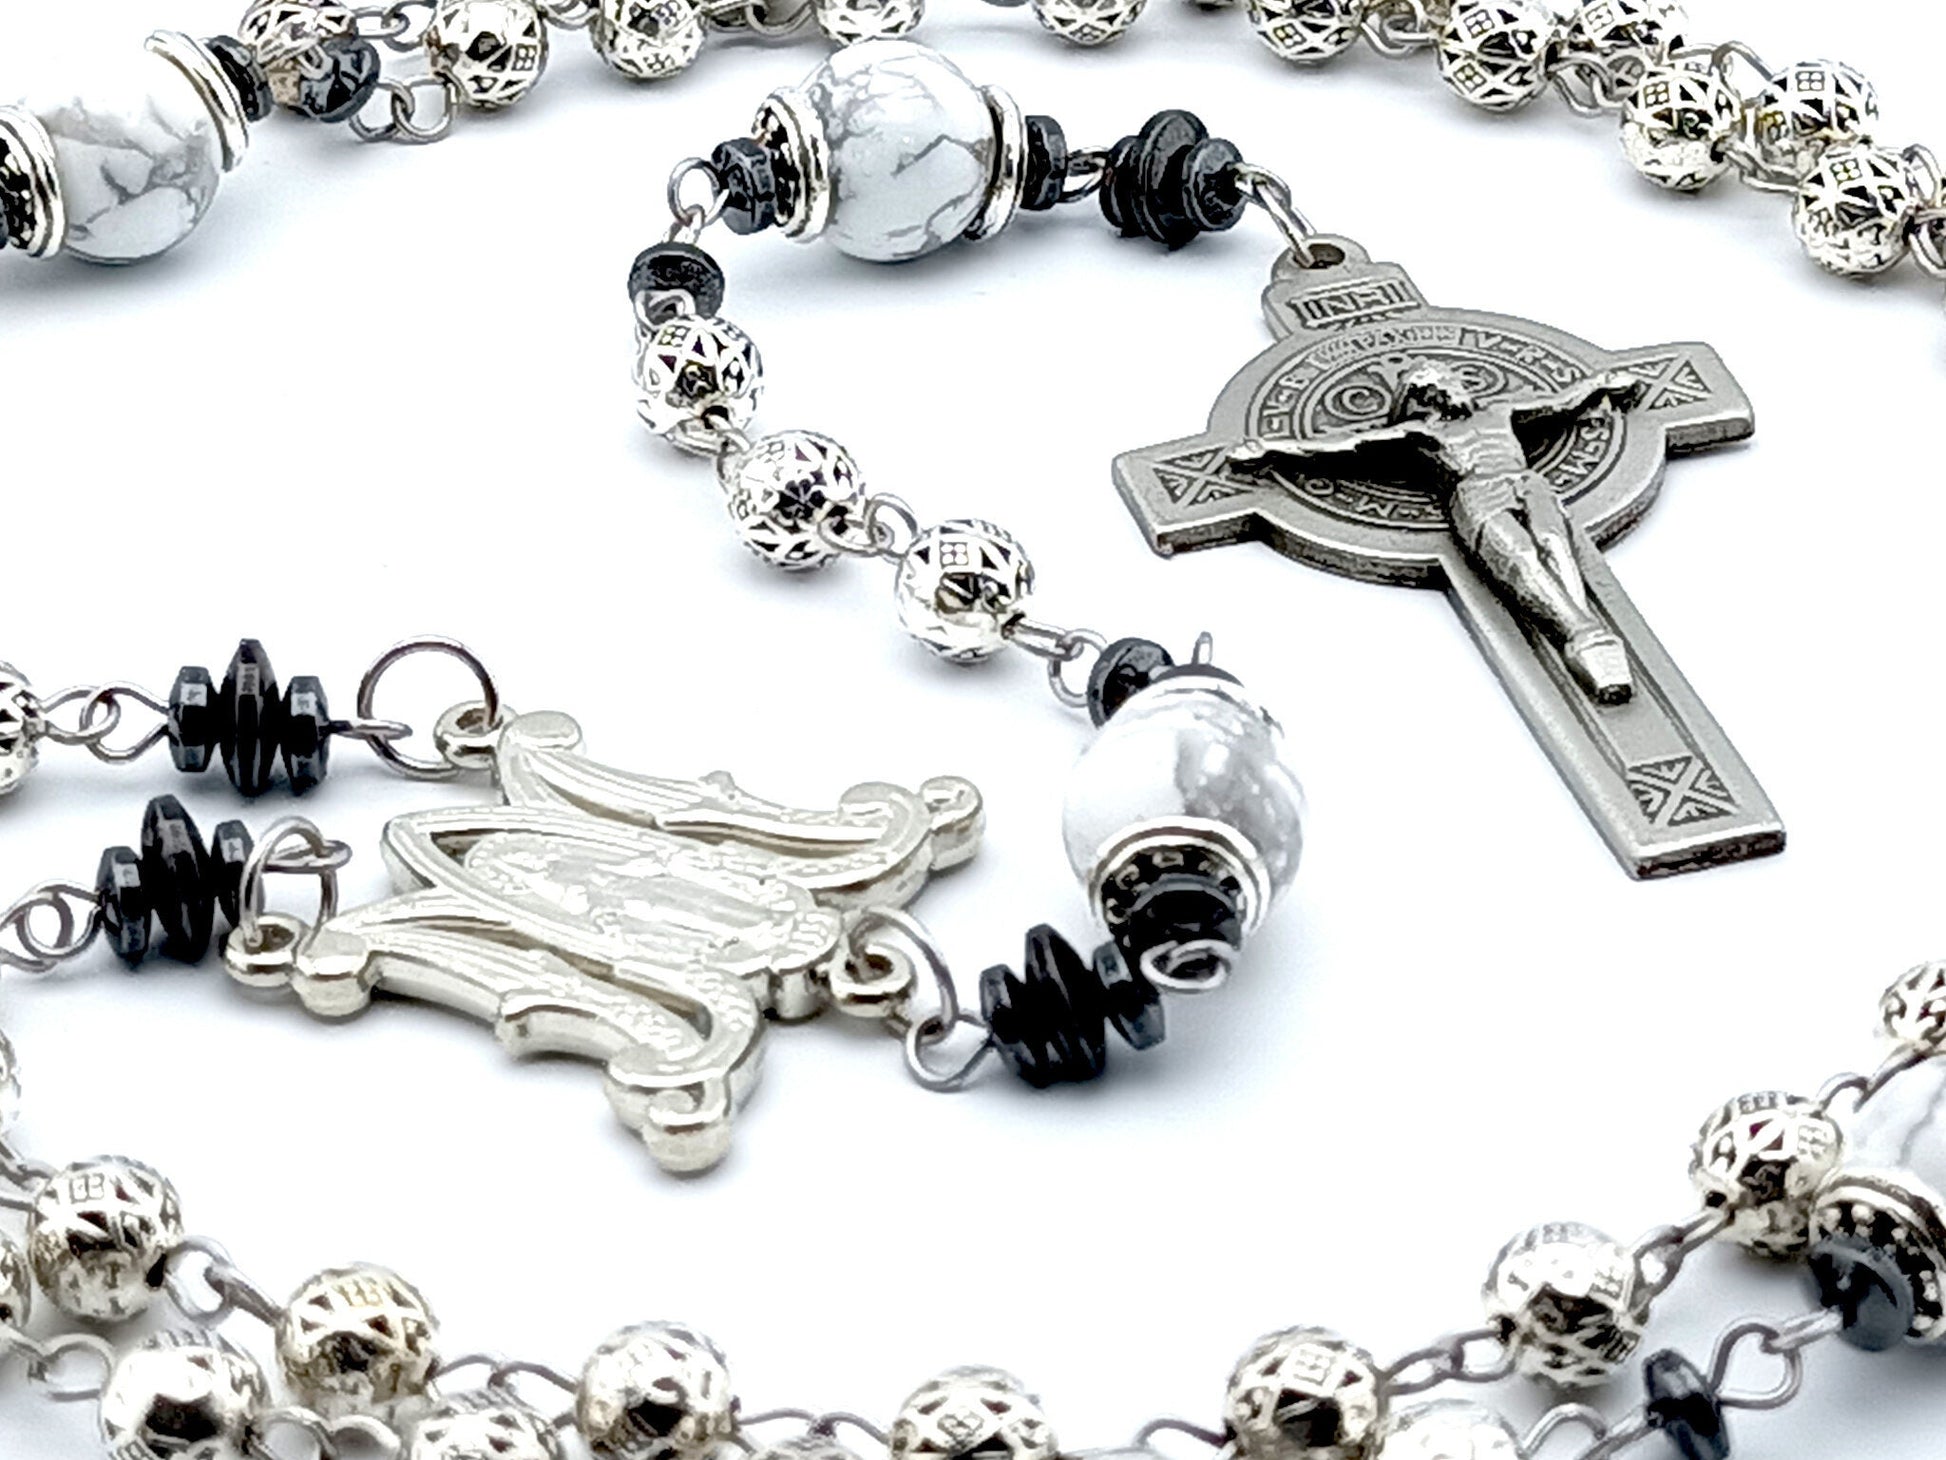 Saint Benedict unique rosary beads with silver metal beads, pewter Saint Benedict crucifix, silver miraculous medal centre and white gemstone pater beads.